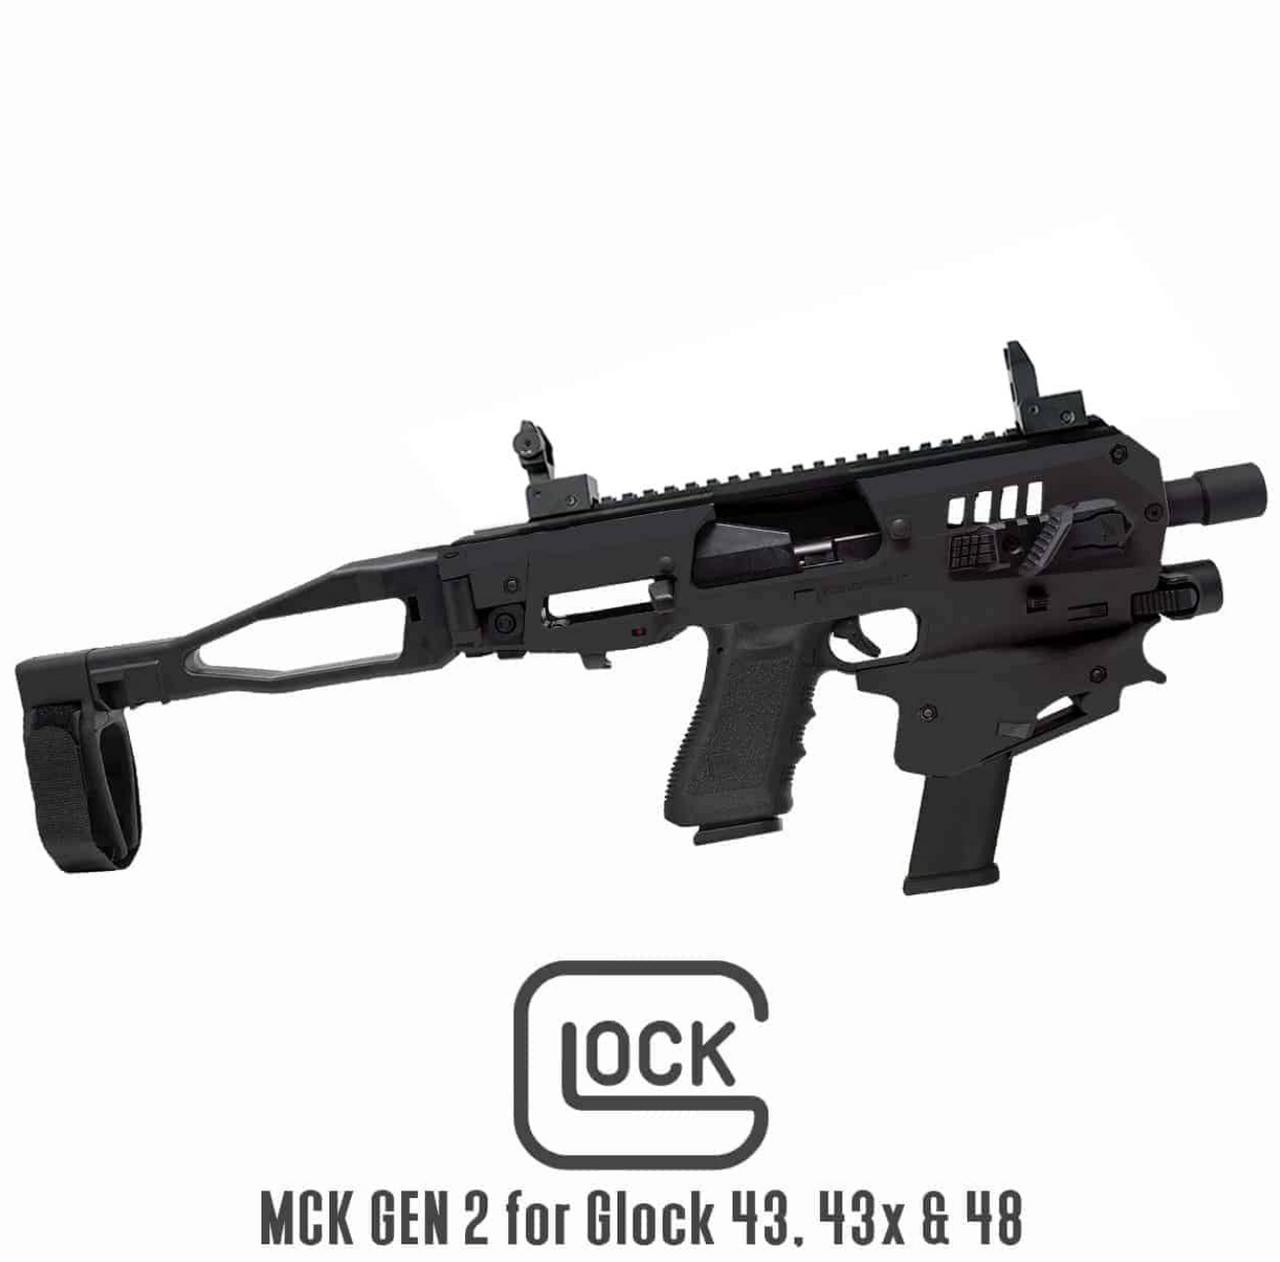 Micro Conversion Kit for Glock 43, 43x, 48